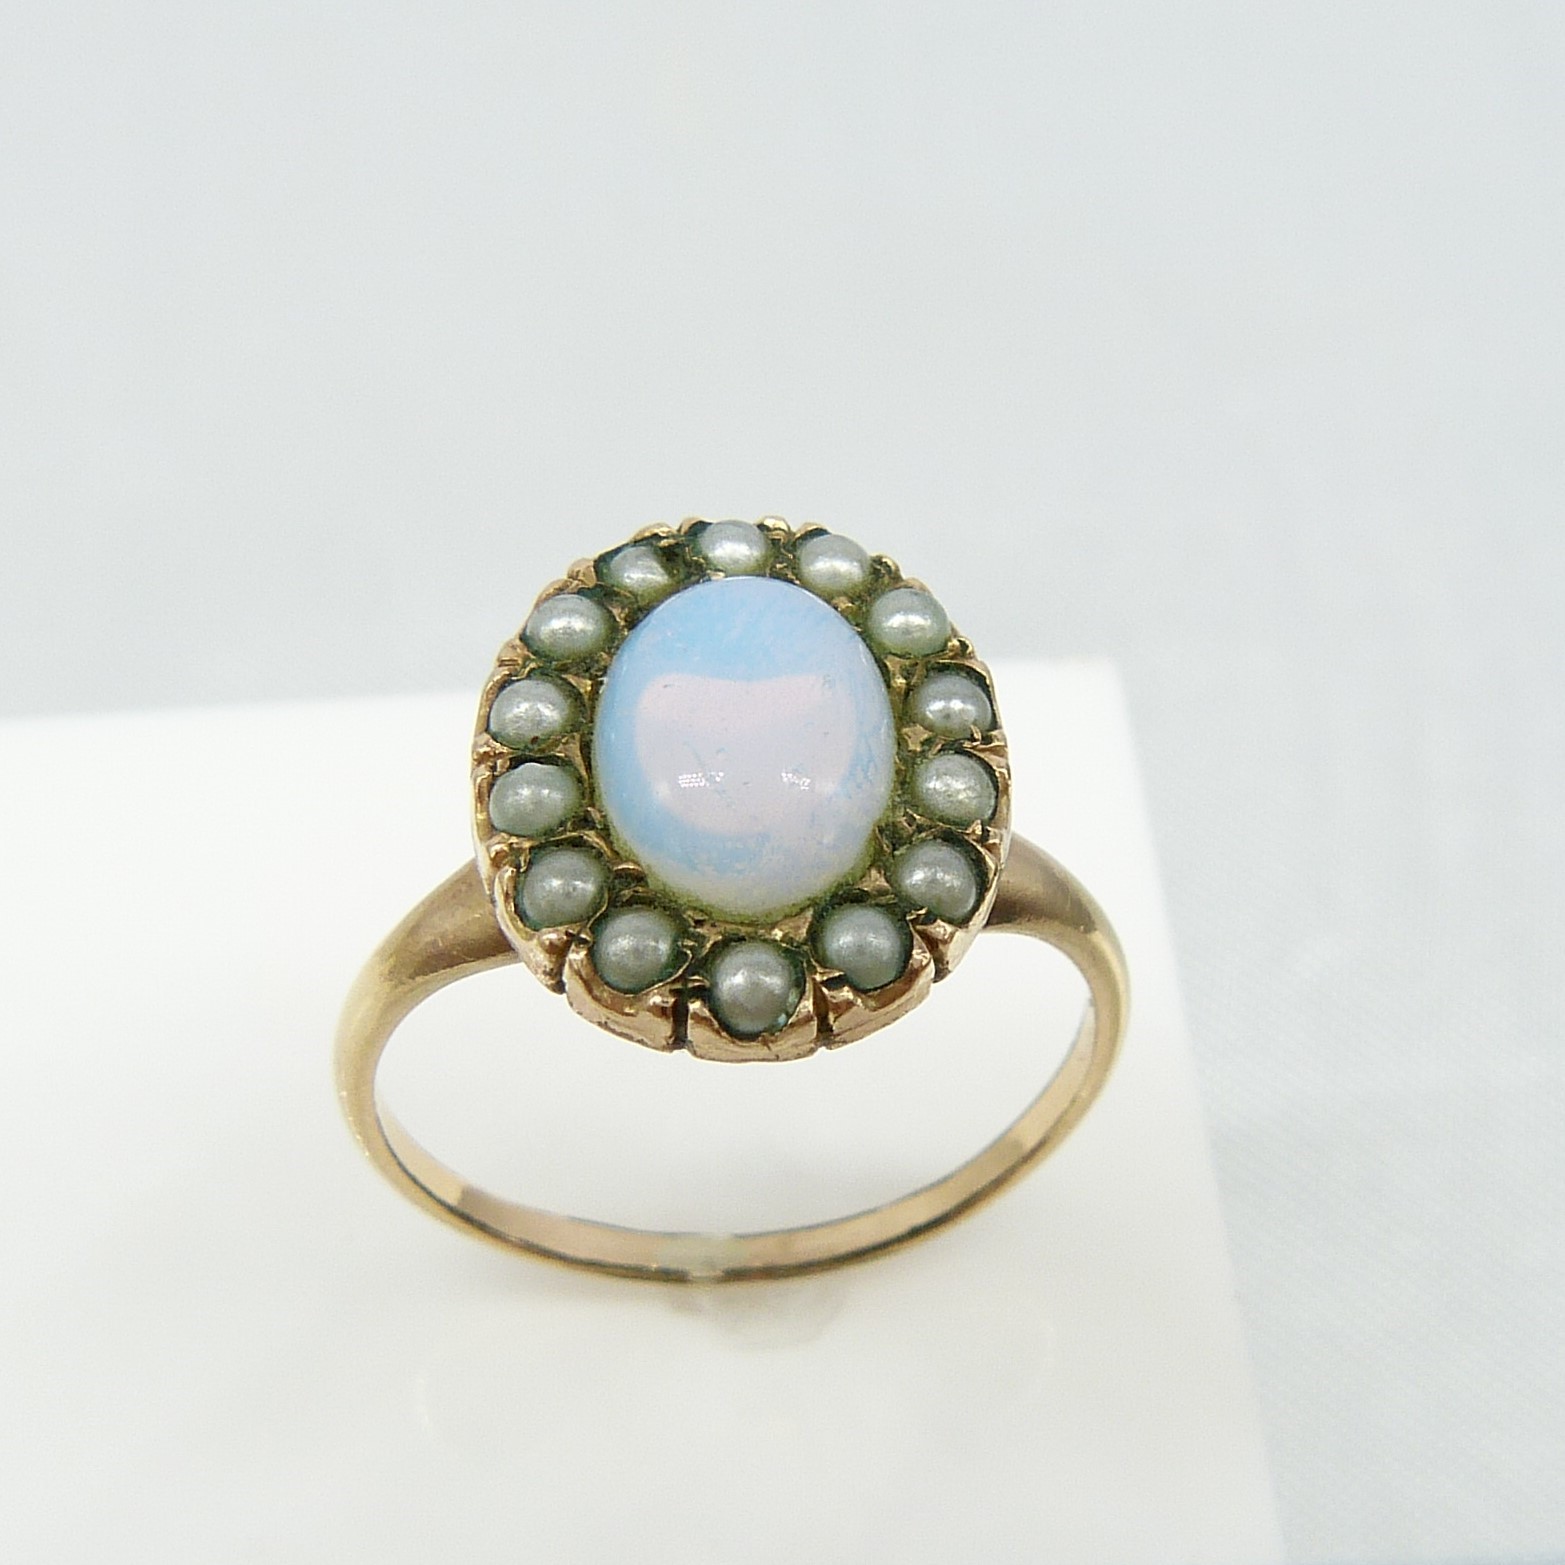 Vintage Victorian-Style Halo Ring Set With Opalite and Seed Pearls - Image 2 of 6